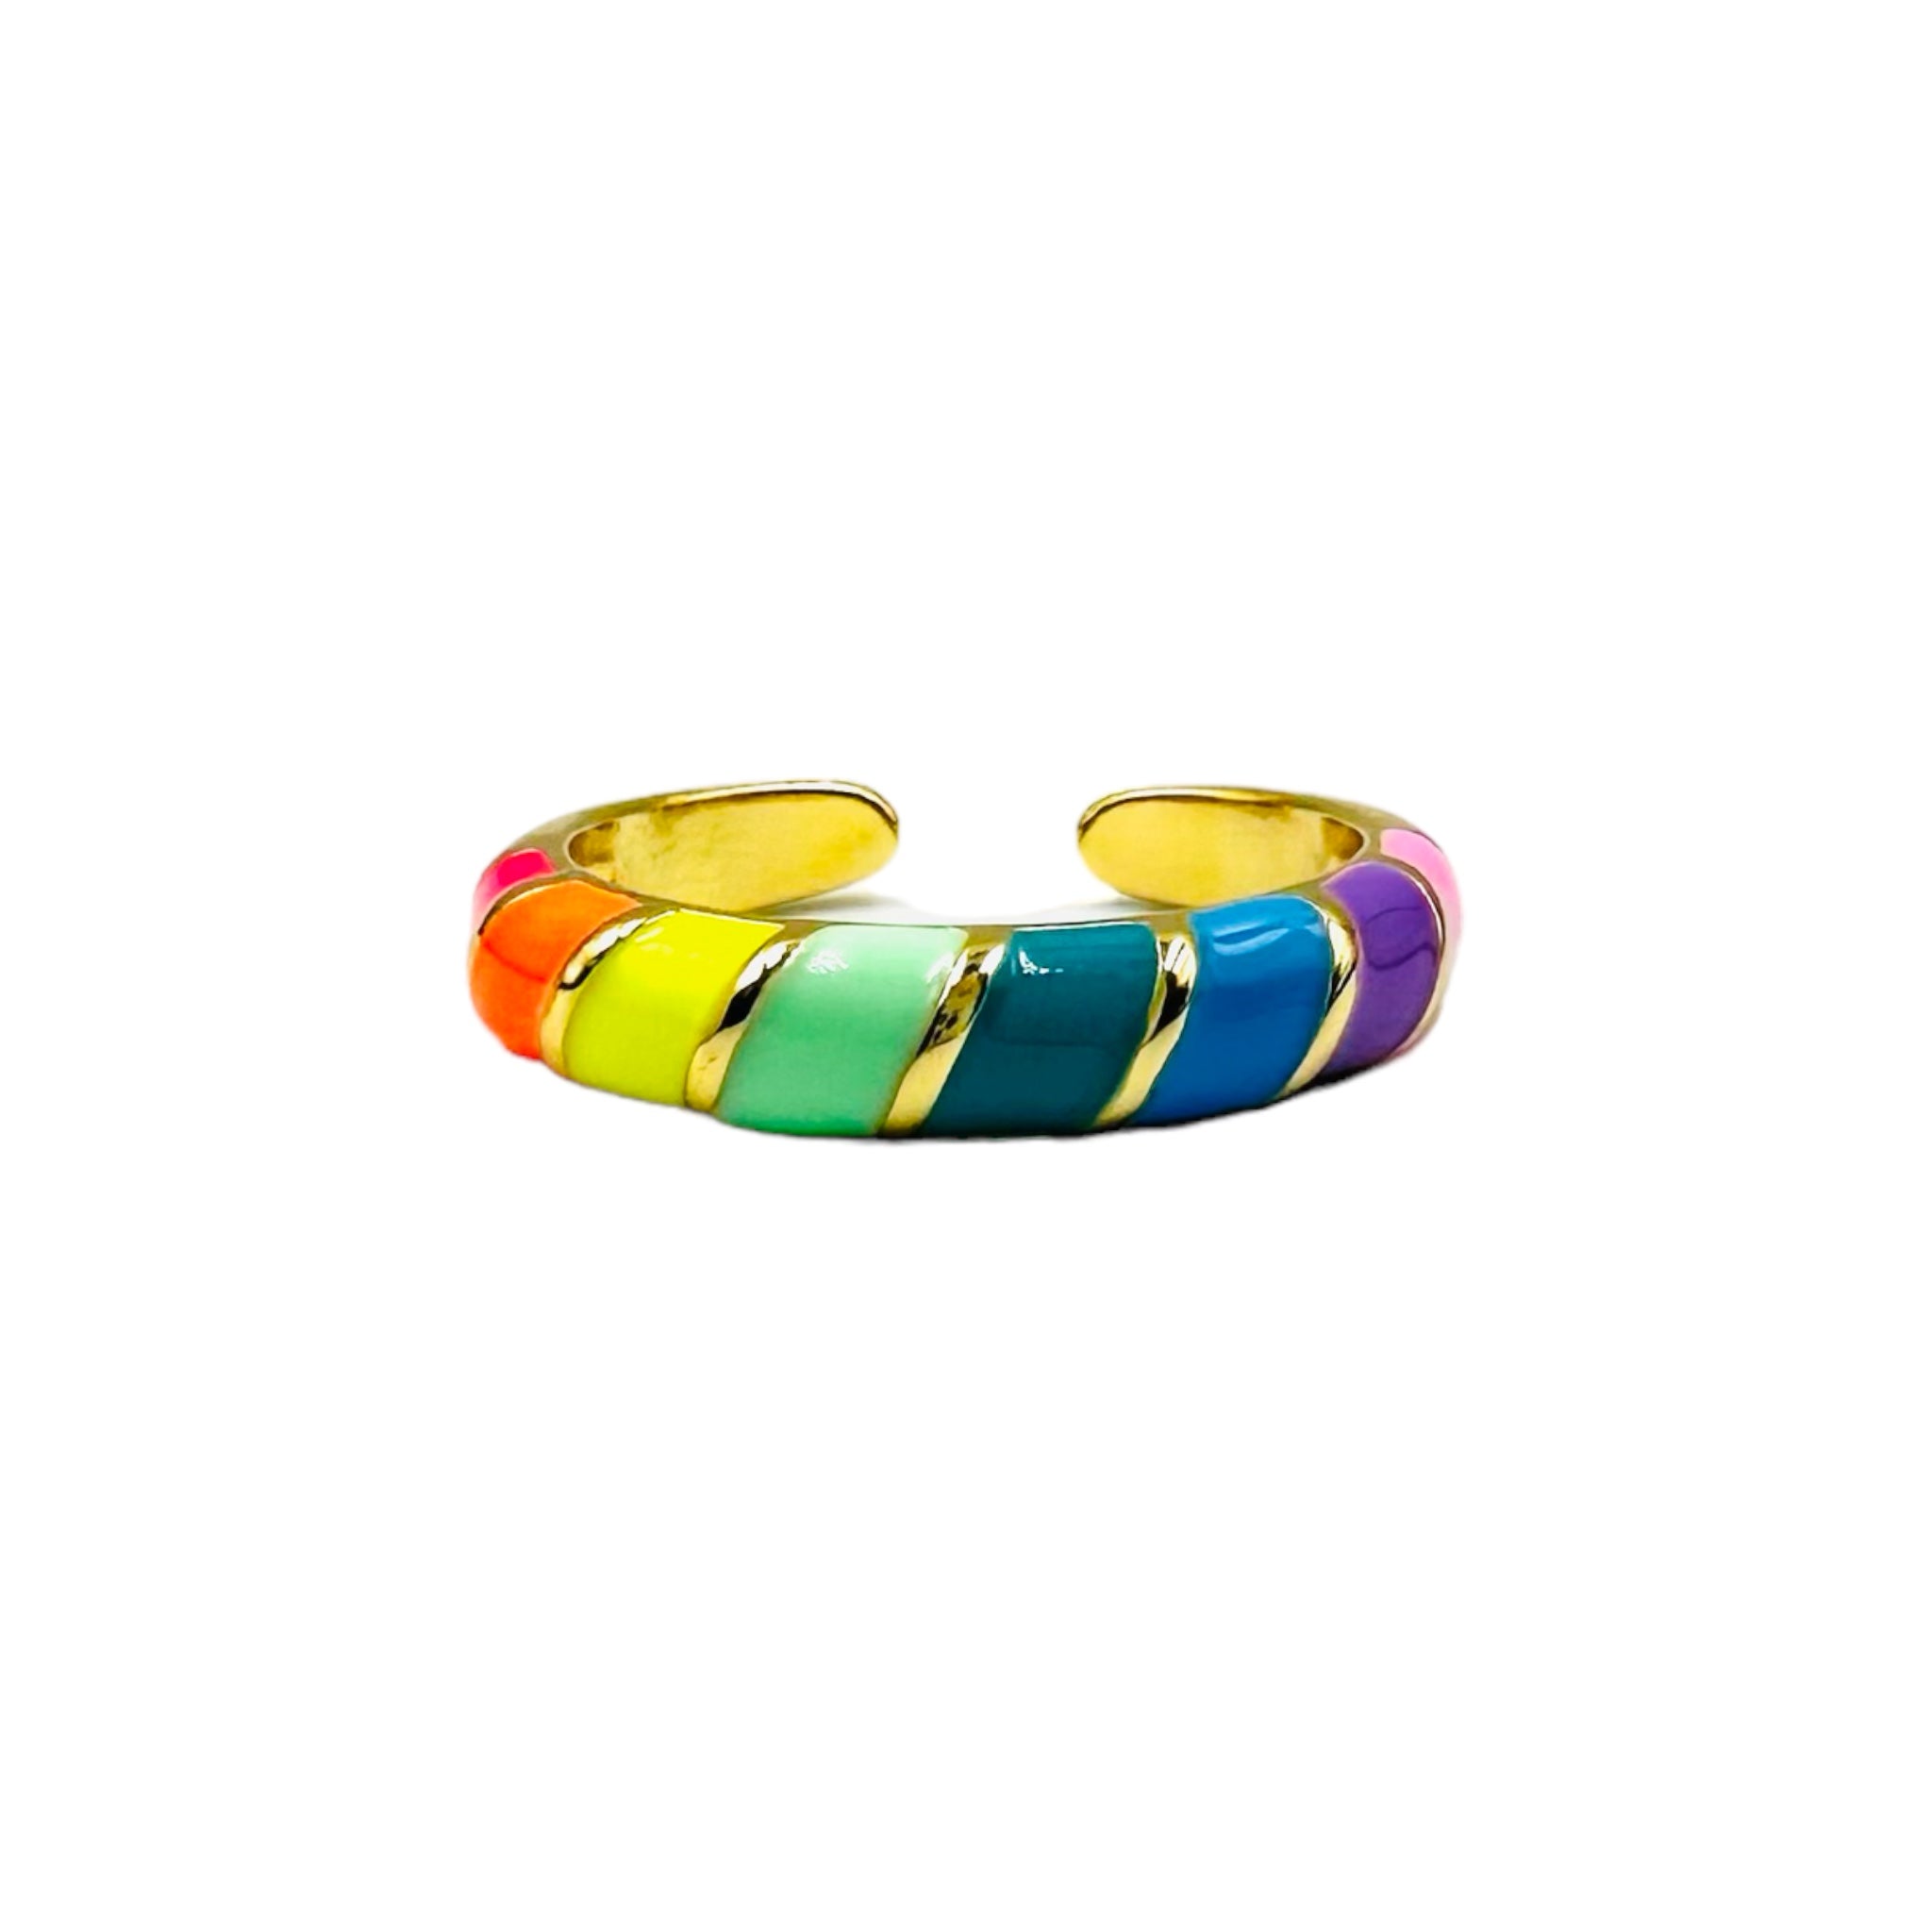 RING RAINBOW S - Available in 11 colors